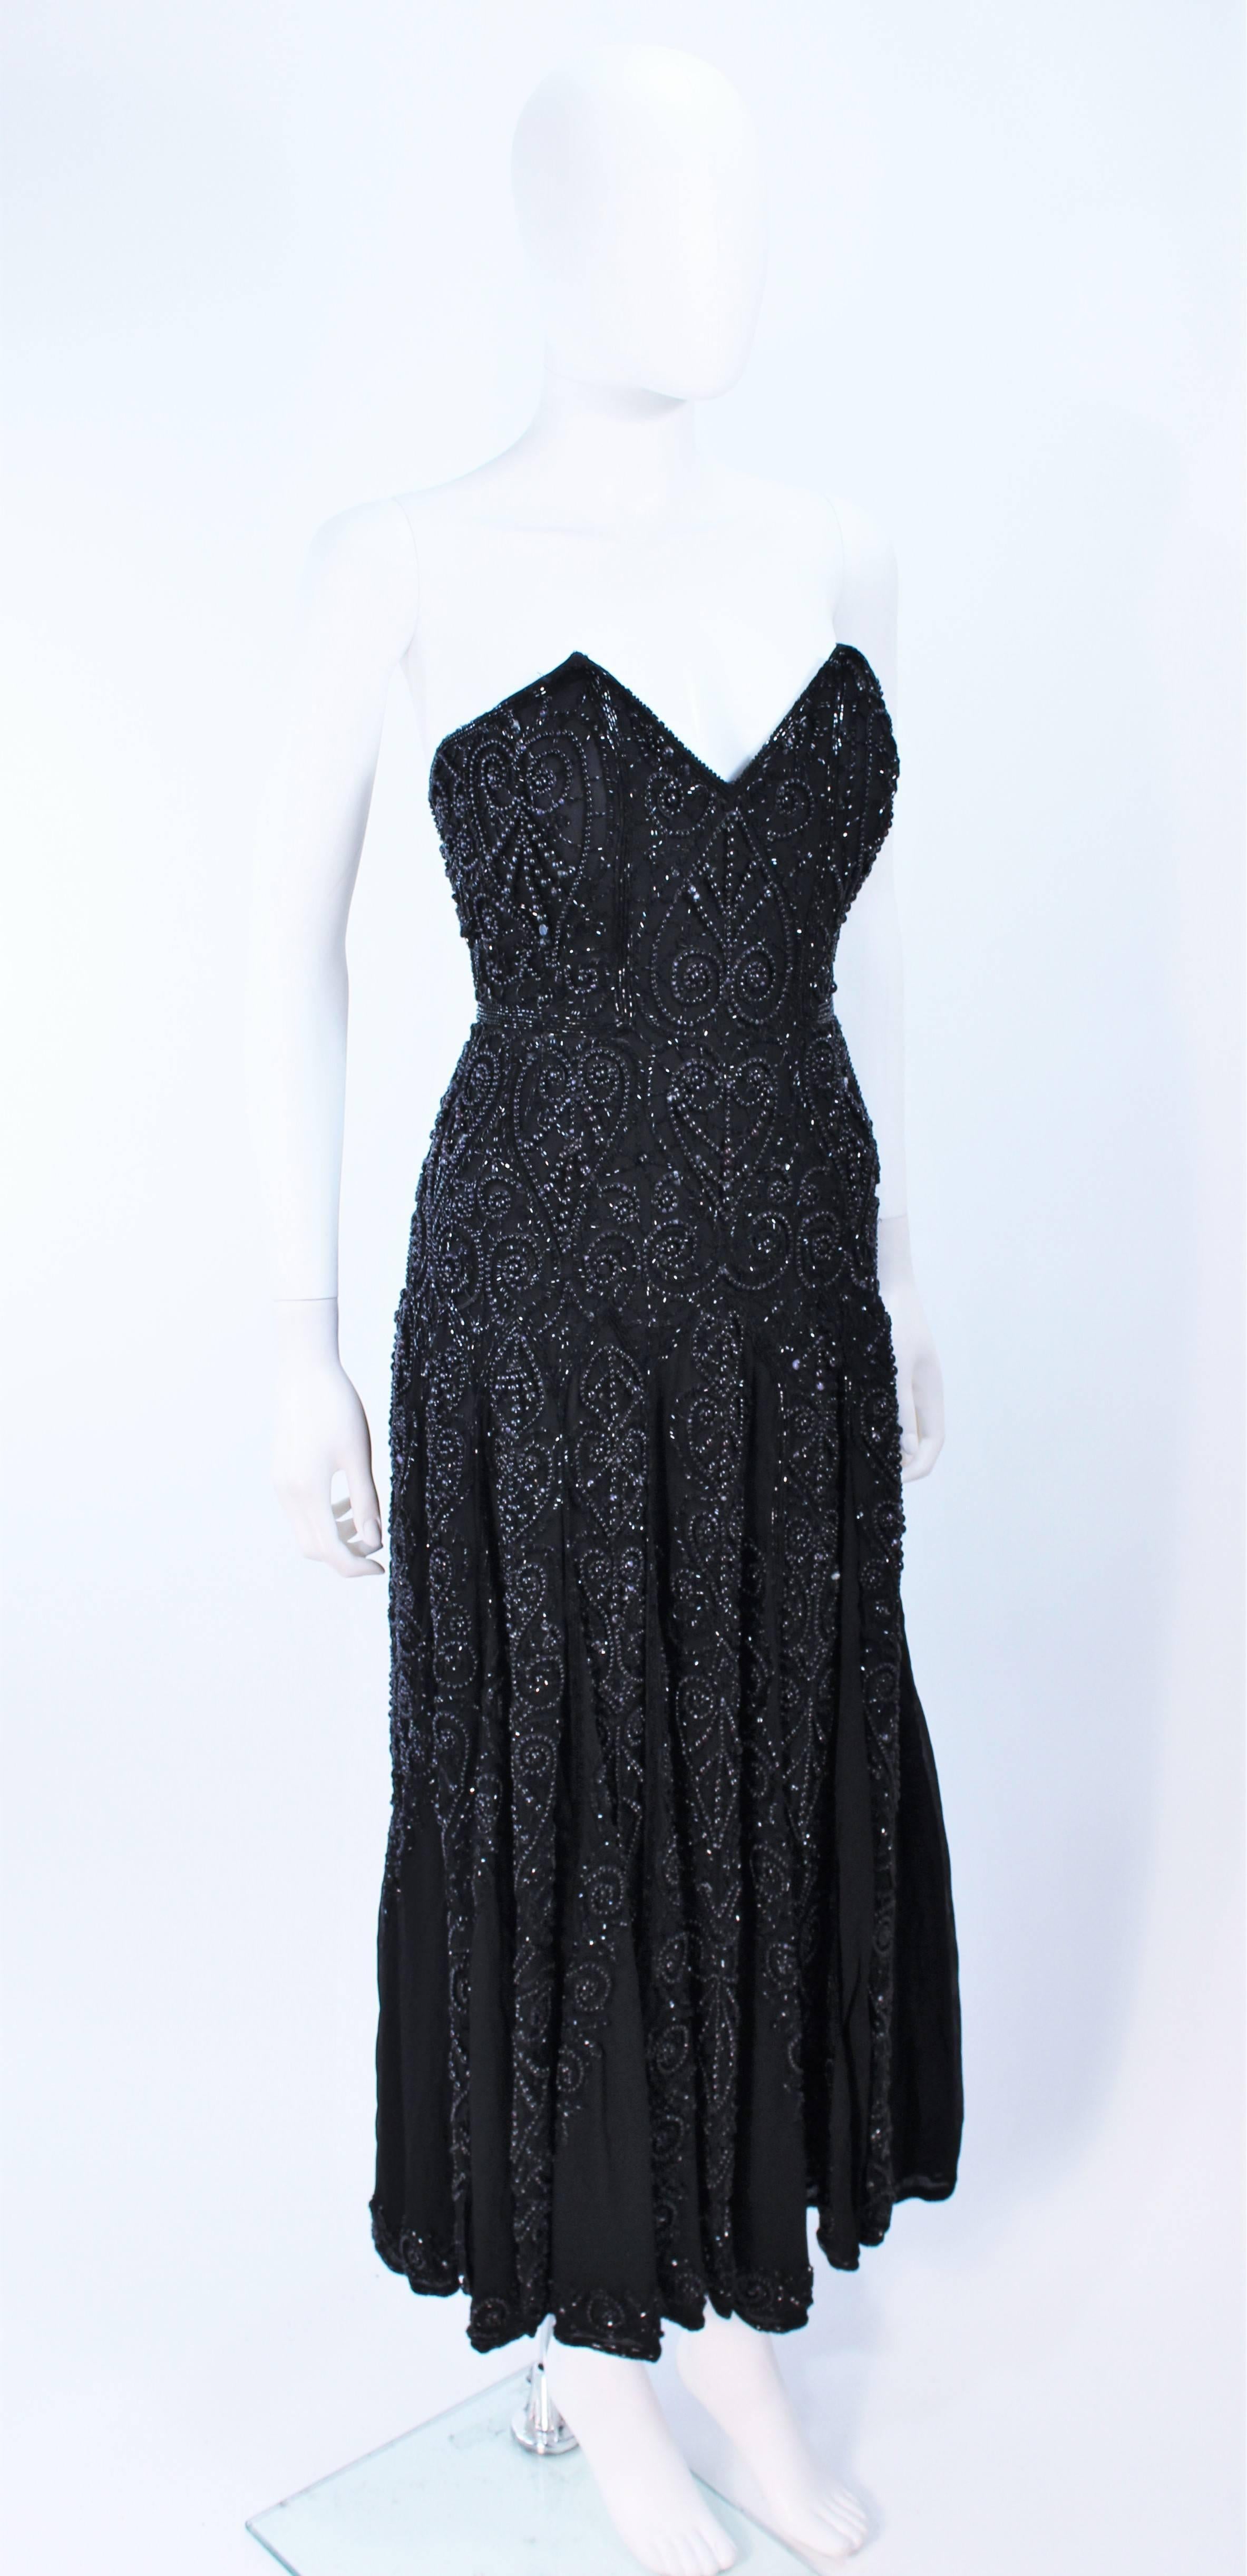 EAVIS & BROWN Black Velvet Heavily Beaded Strapless Gown with Chiffon Size 2 4 In Excellent Condition For Sale In Los Angeles, CA